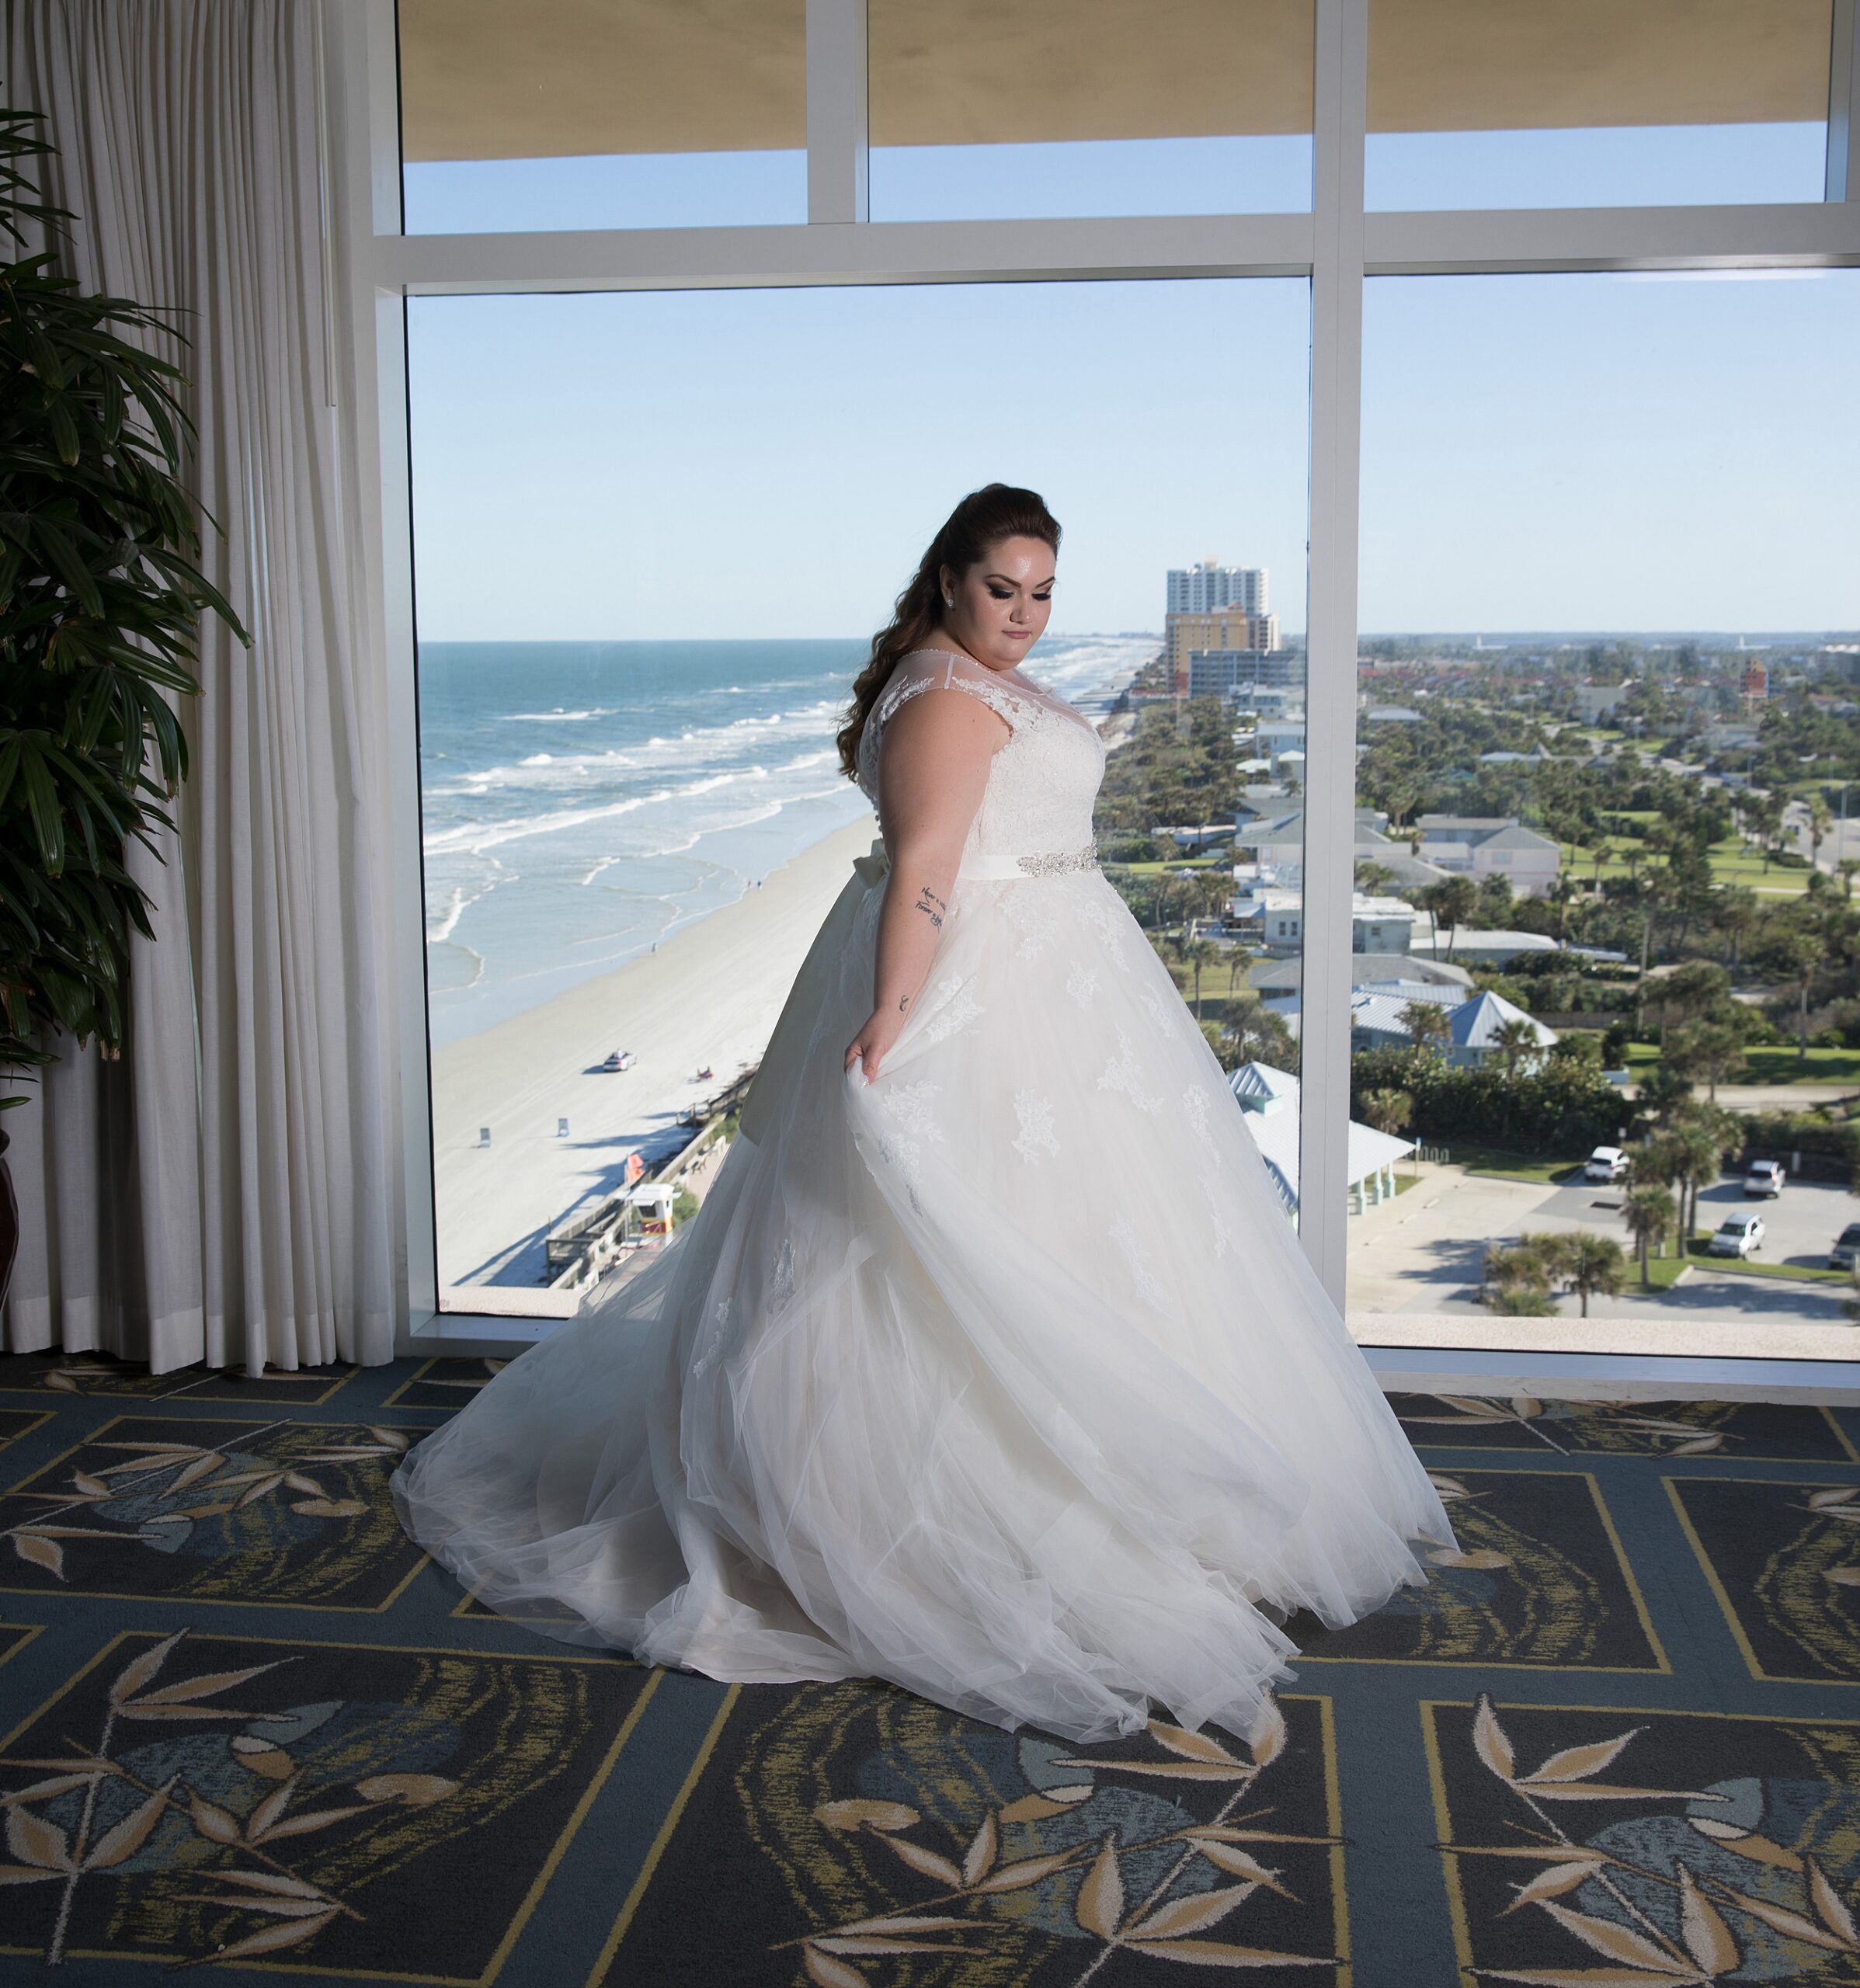 A bride twirls while showing off her dress in a high rise beach front hotel room